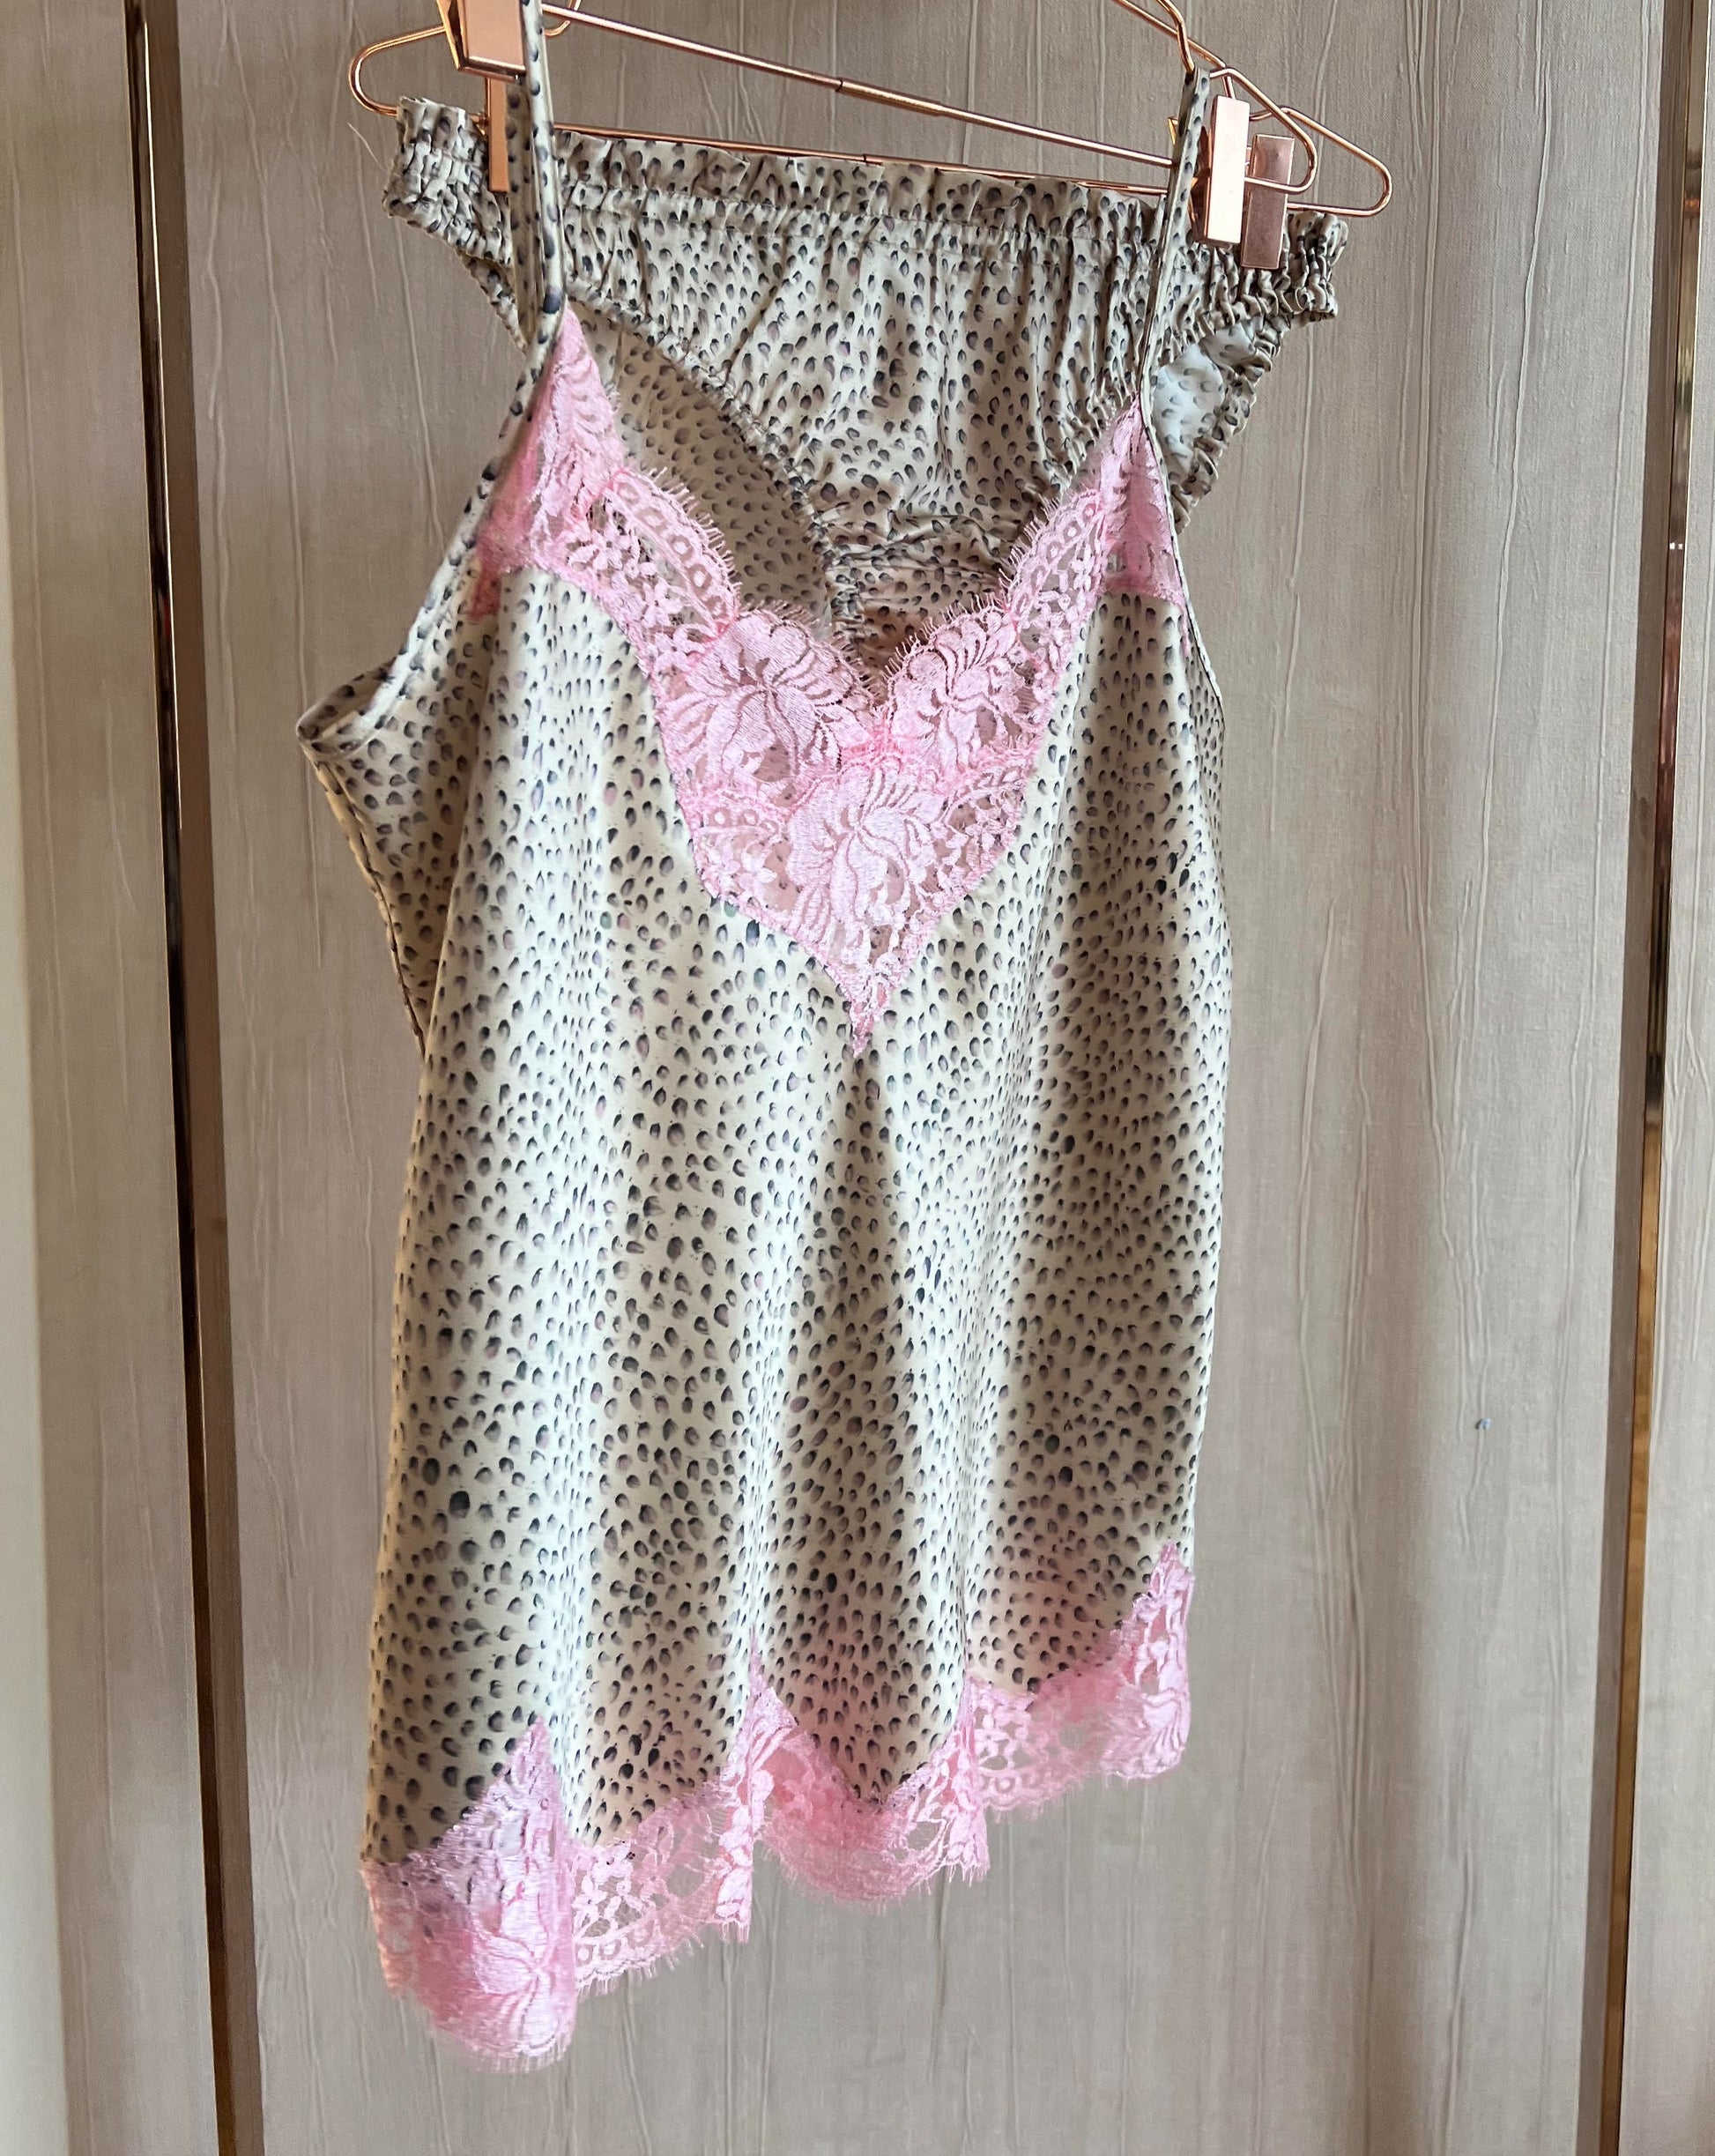 Animal Print silk camisole adorned with pink french lace. made in australia